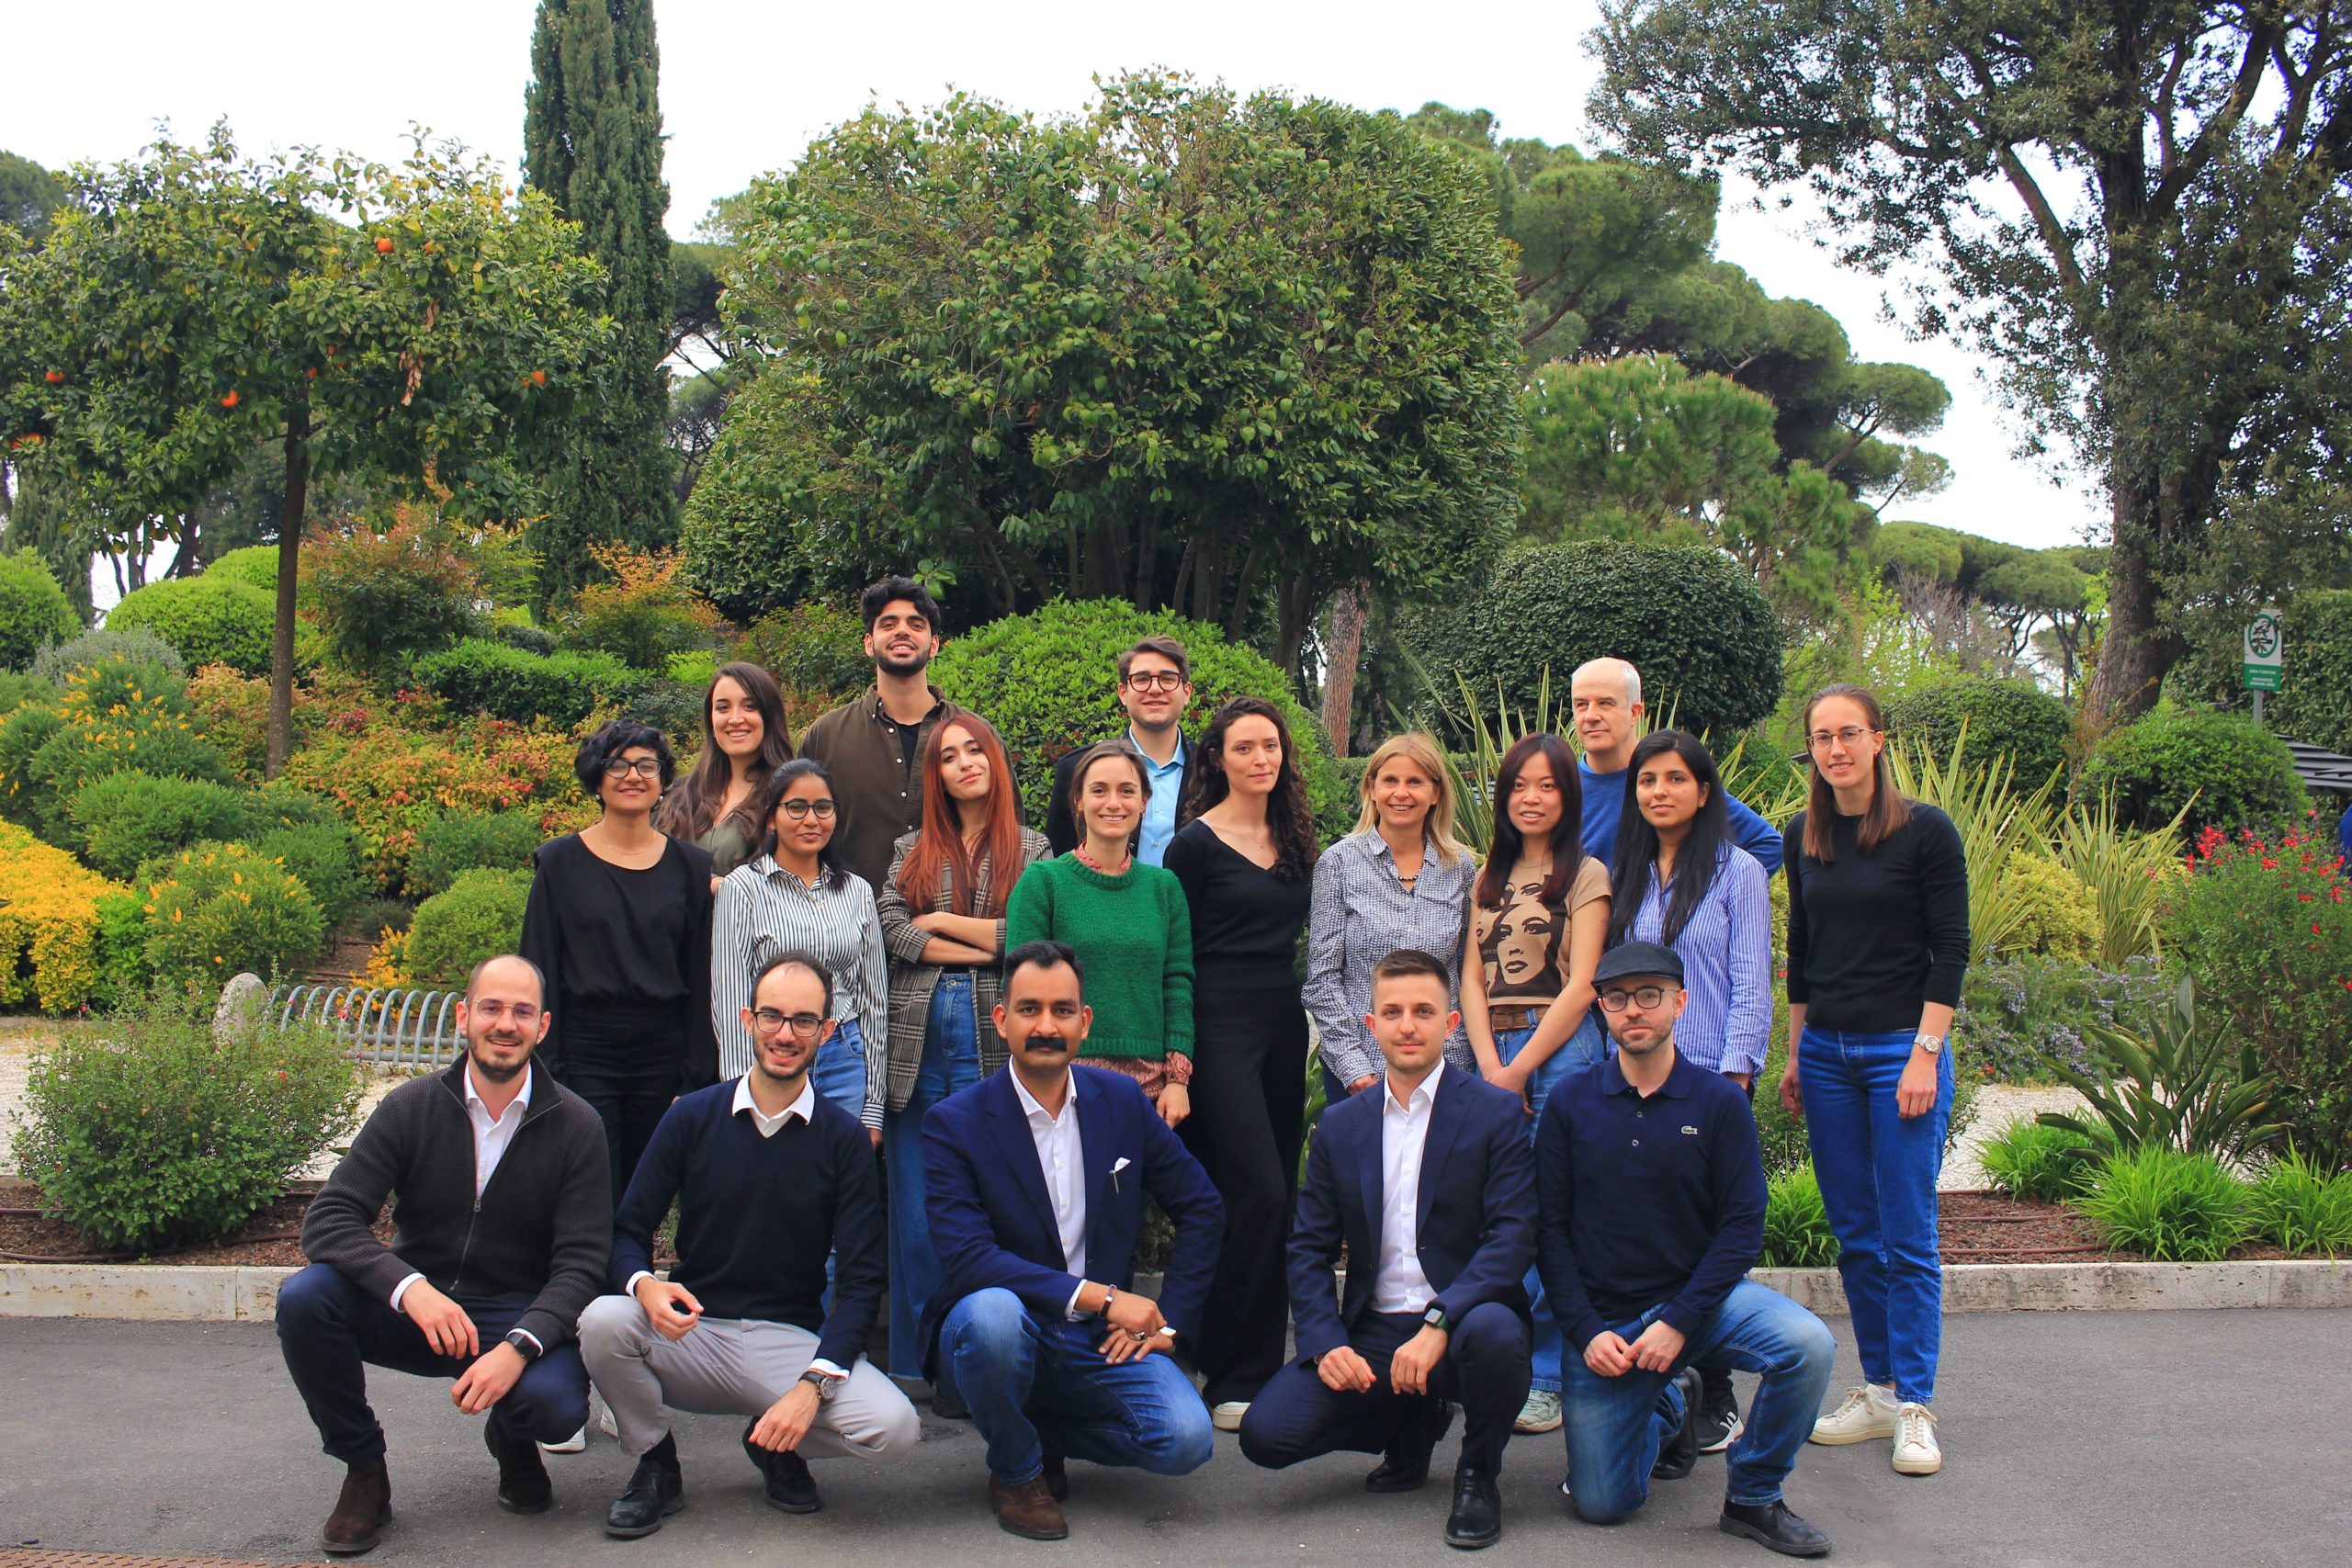 phd management in italy